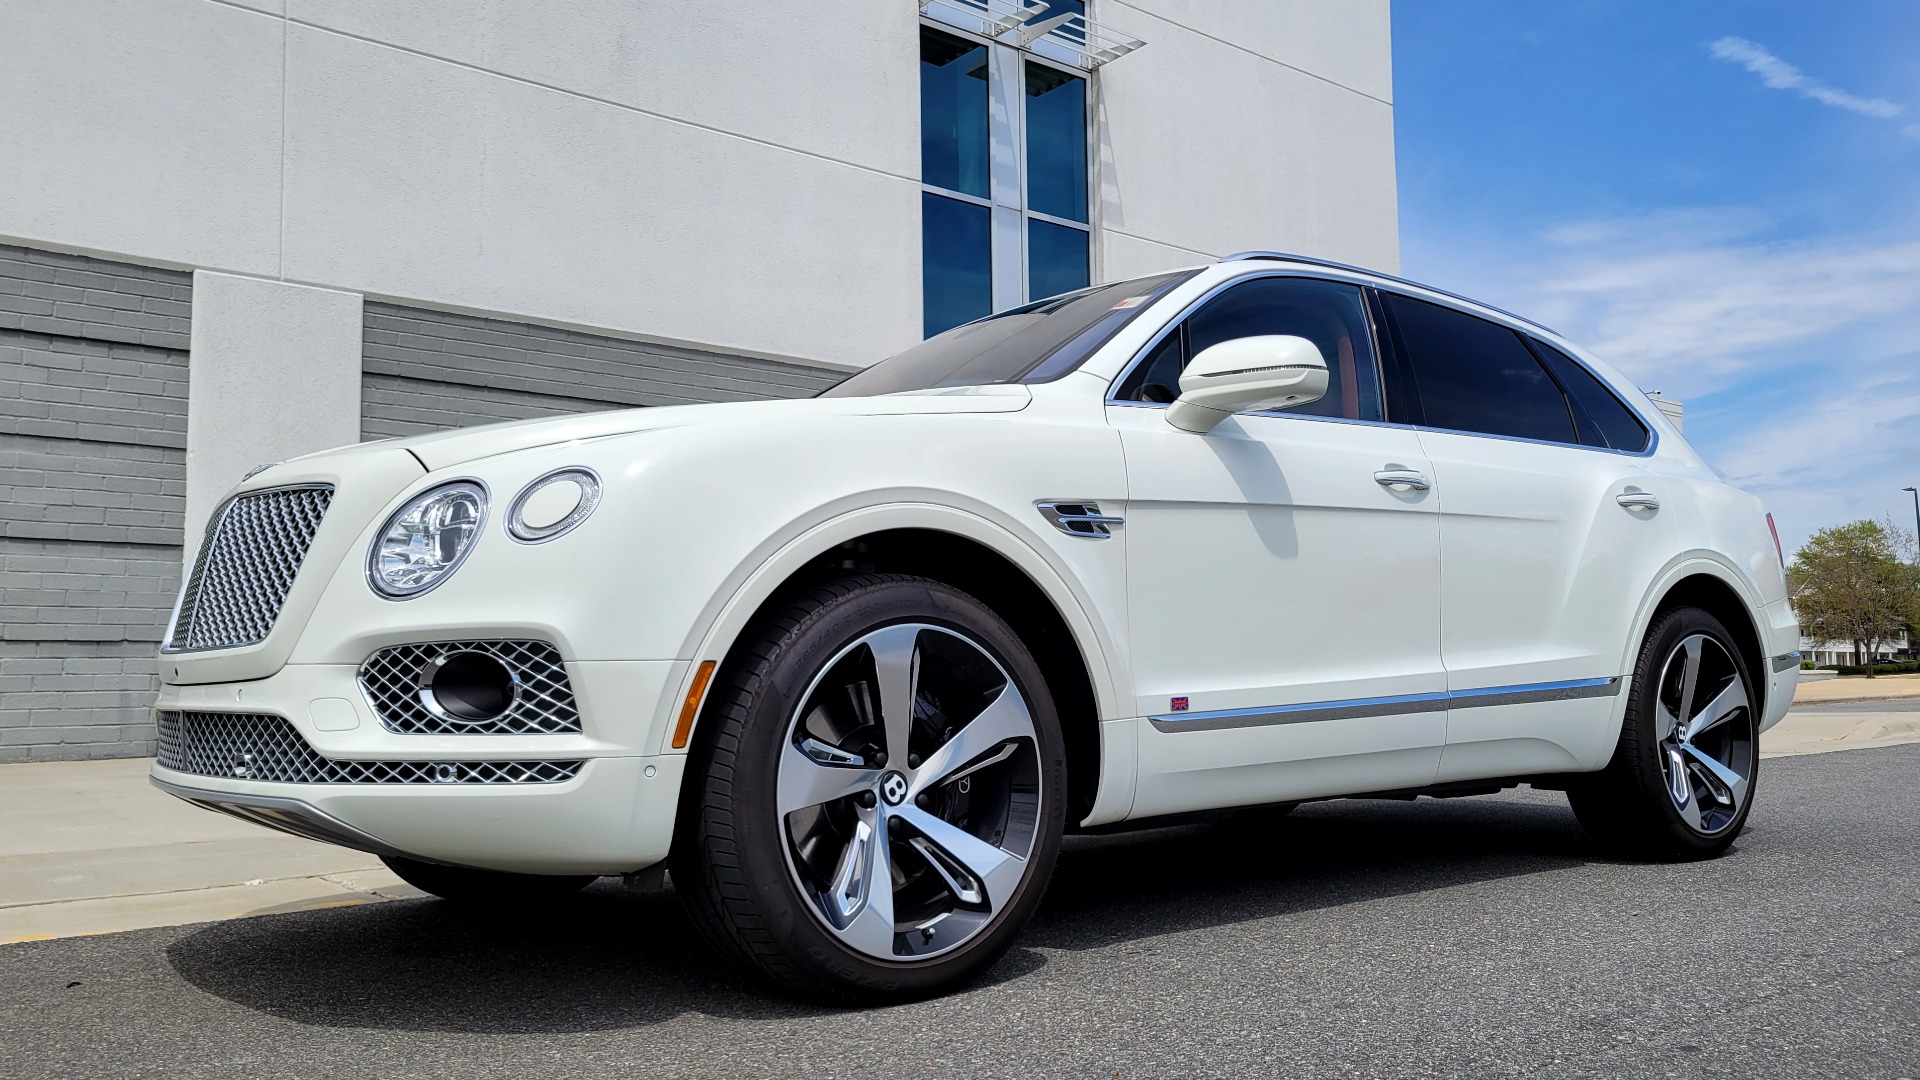 Used 2017 Bentley BENTAYGA W12 FIRST EDITION / AWD / NAV / HUD / SUNROOF / PREM SND / REARVIEW for sale $145,000 at Formula Imports in Charlotte NC 28227 3